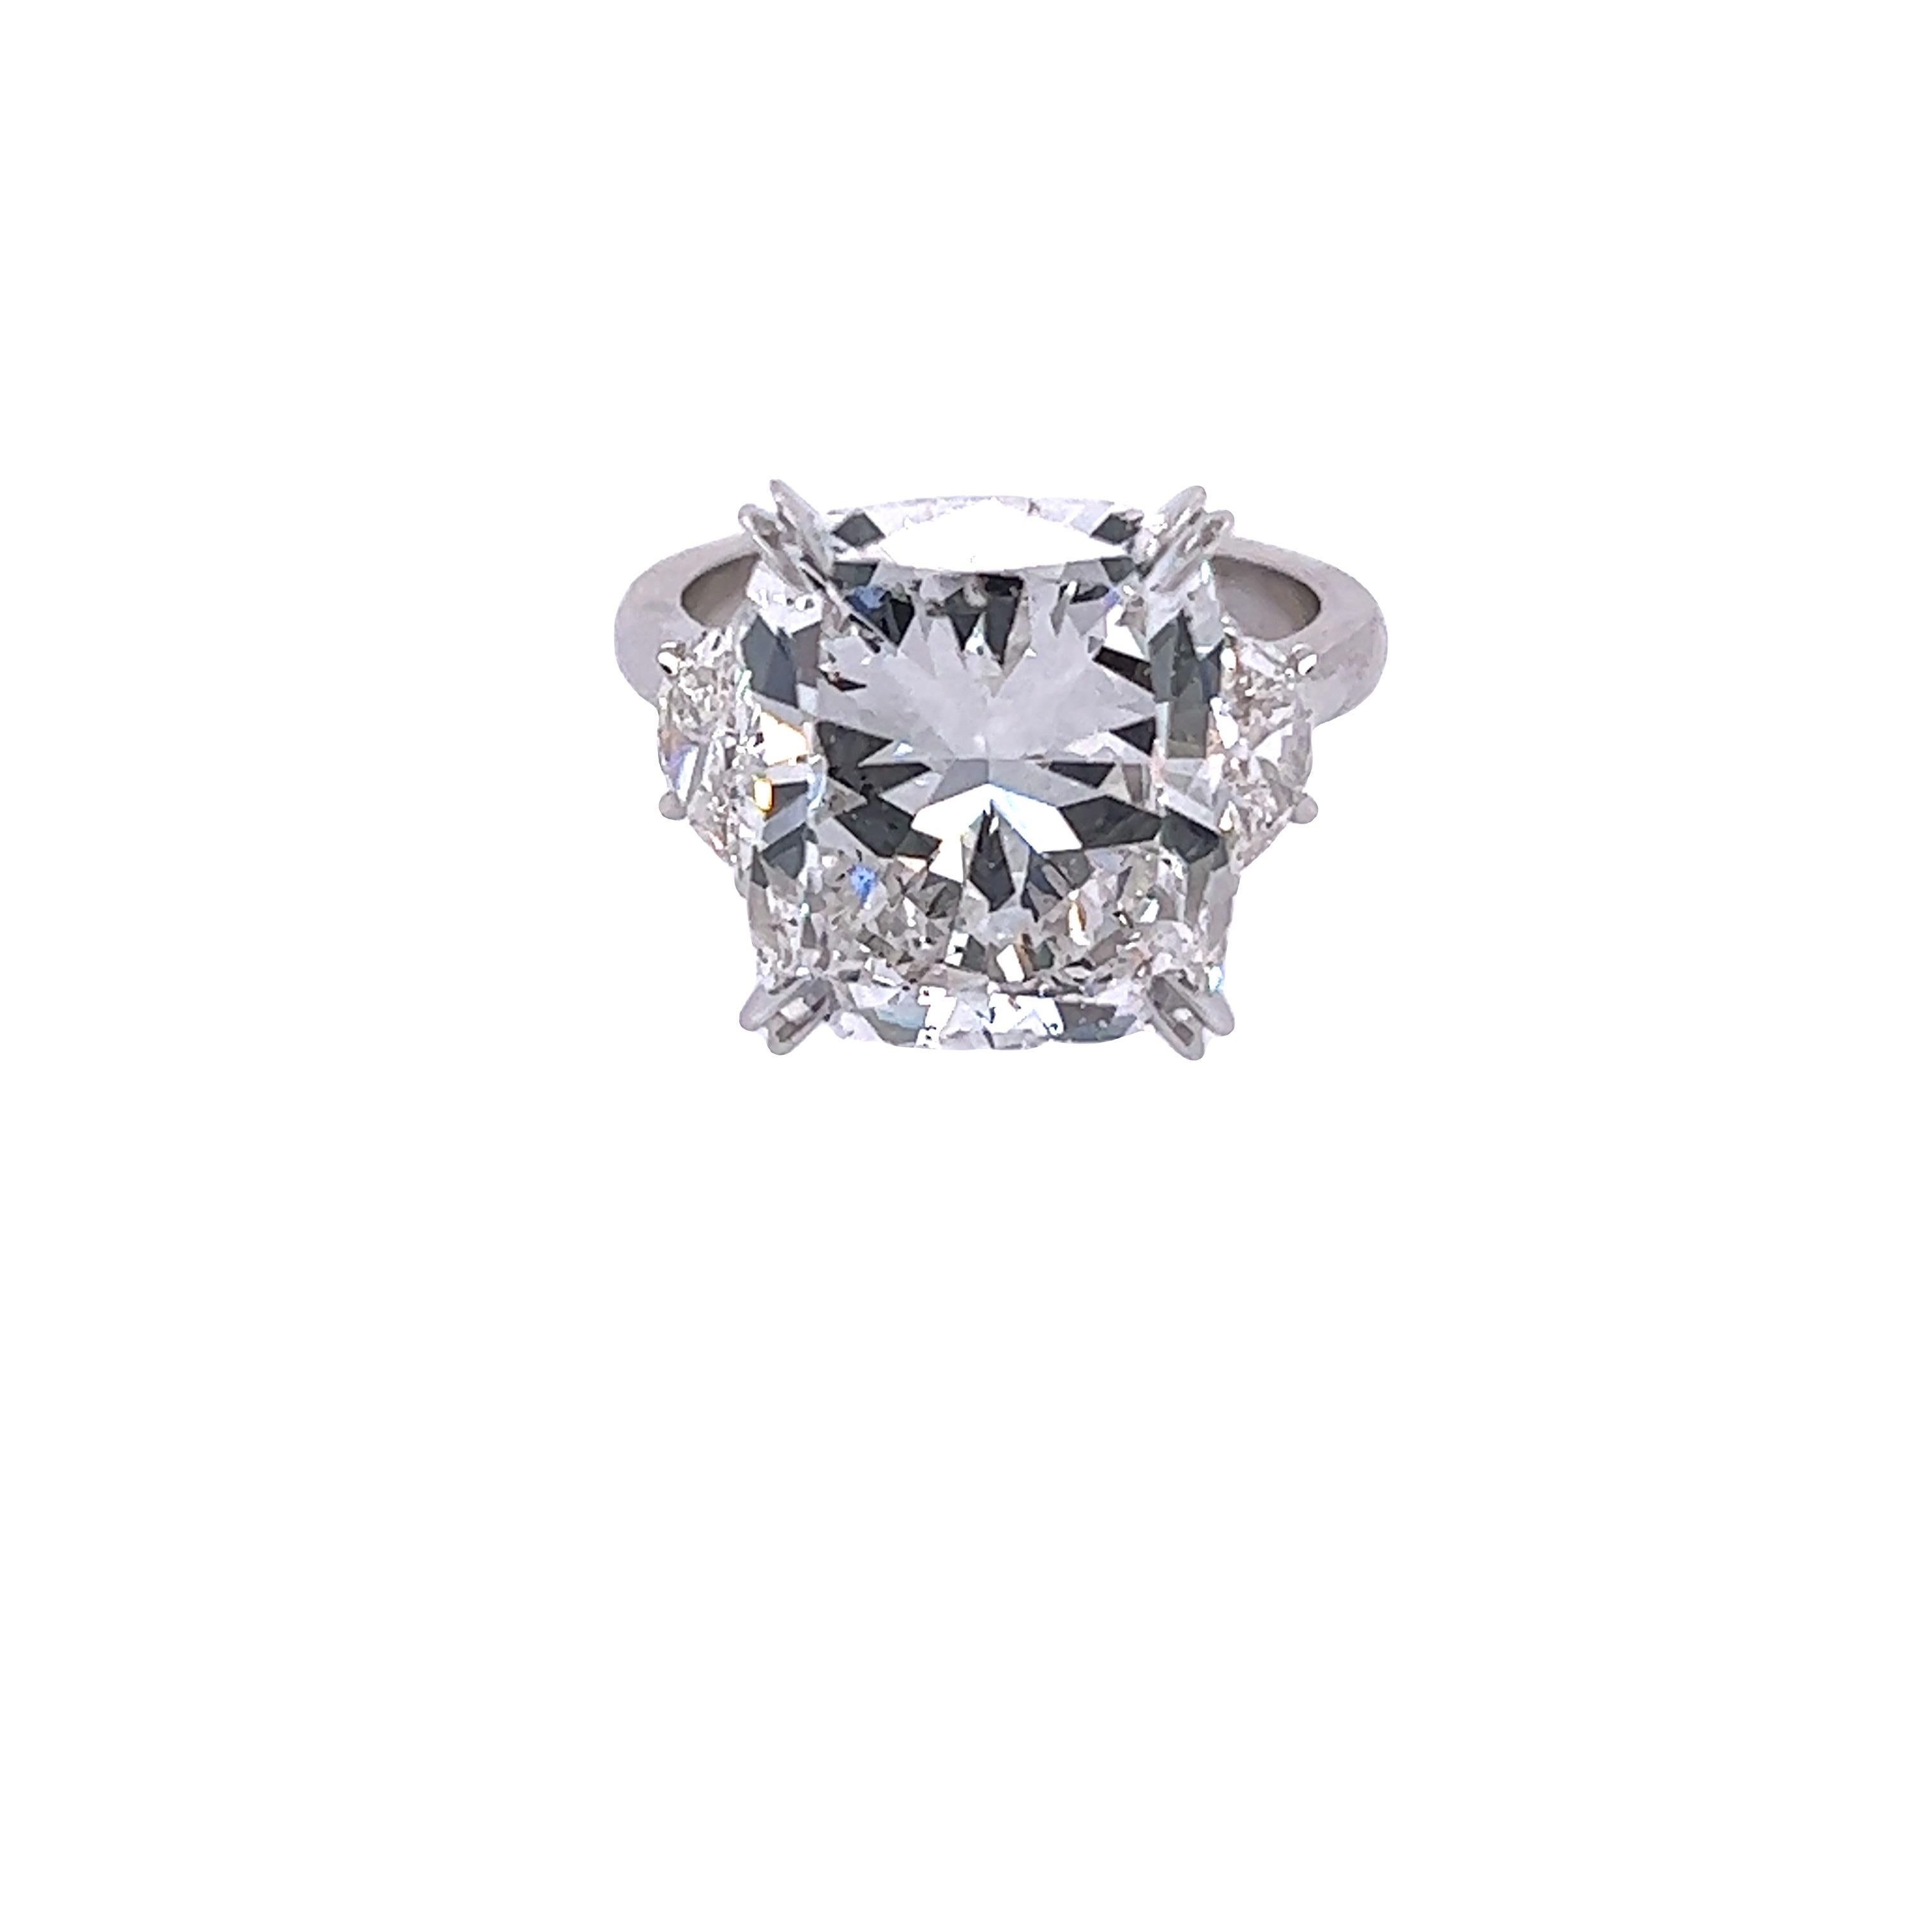 Rosenberg Diamonds & Co. 10.10 carat Cushion cut G color SI2 clarity is accompanied by a GIA certificate. This spectacular cushion is full of brilliance and it is set in a handmade platinum  setting with perfectly matched pair of epaulette side